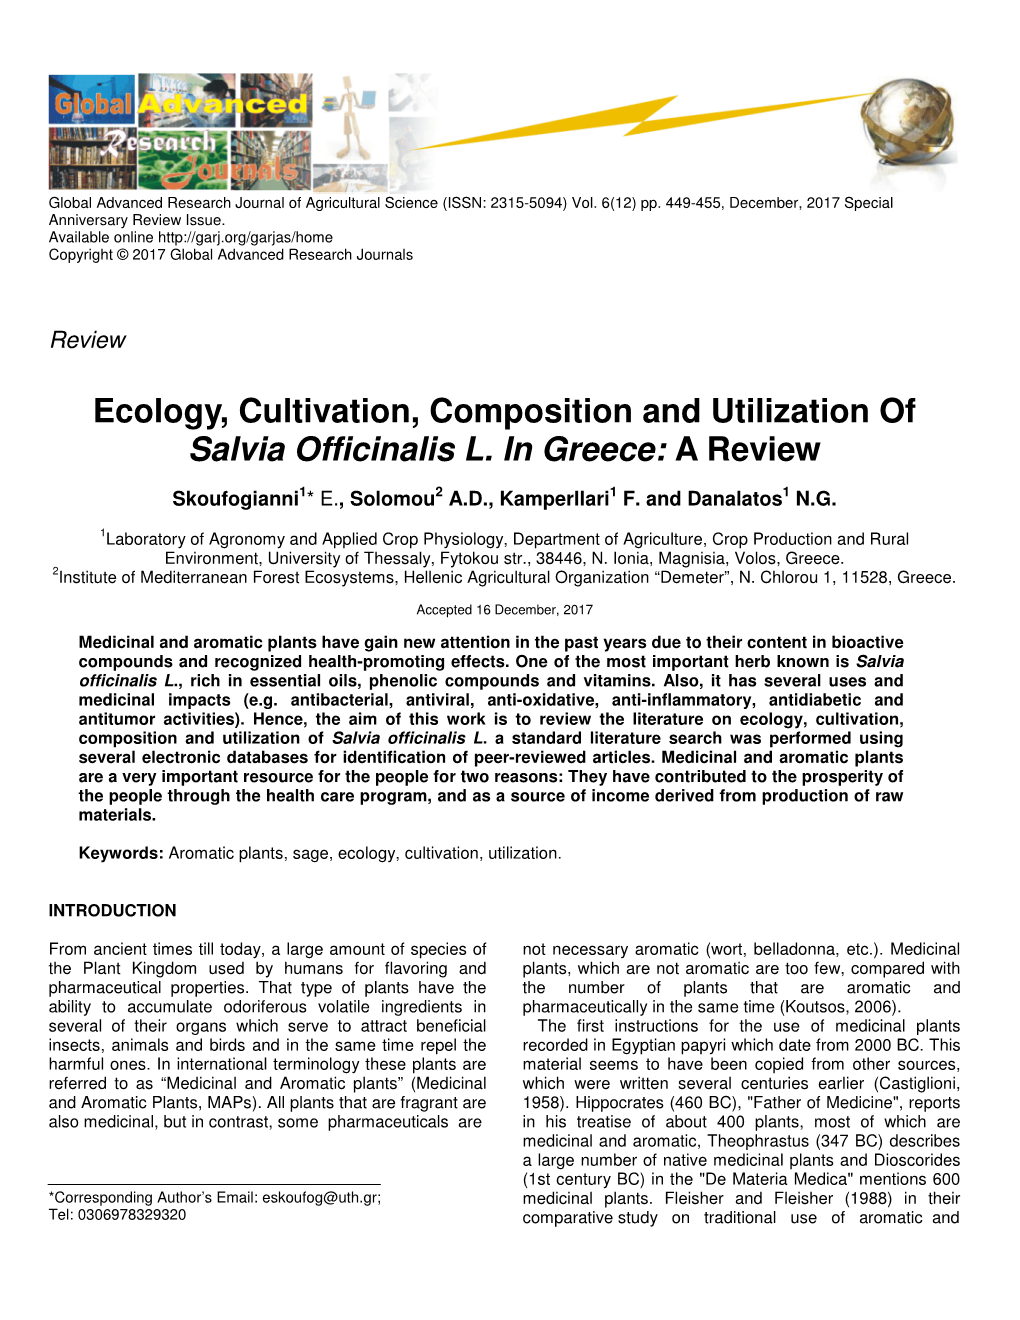 Ecology, Cultivation, Composition and Utilization of Salvia Officinalis L. in Greece: a Review